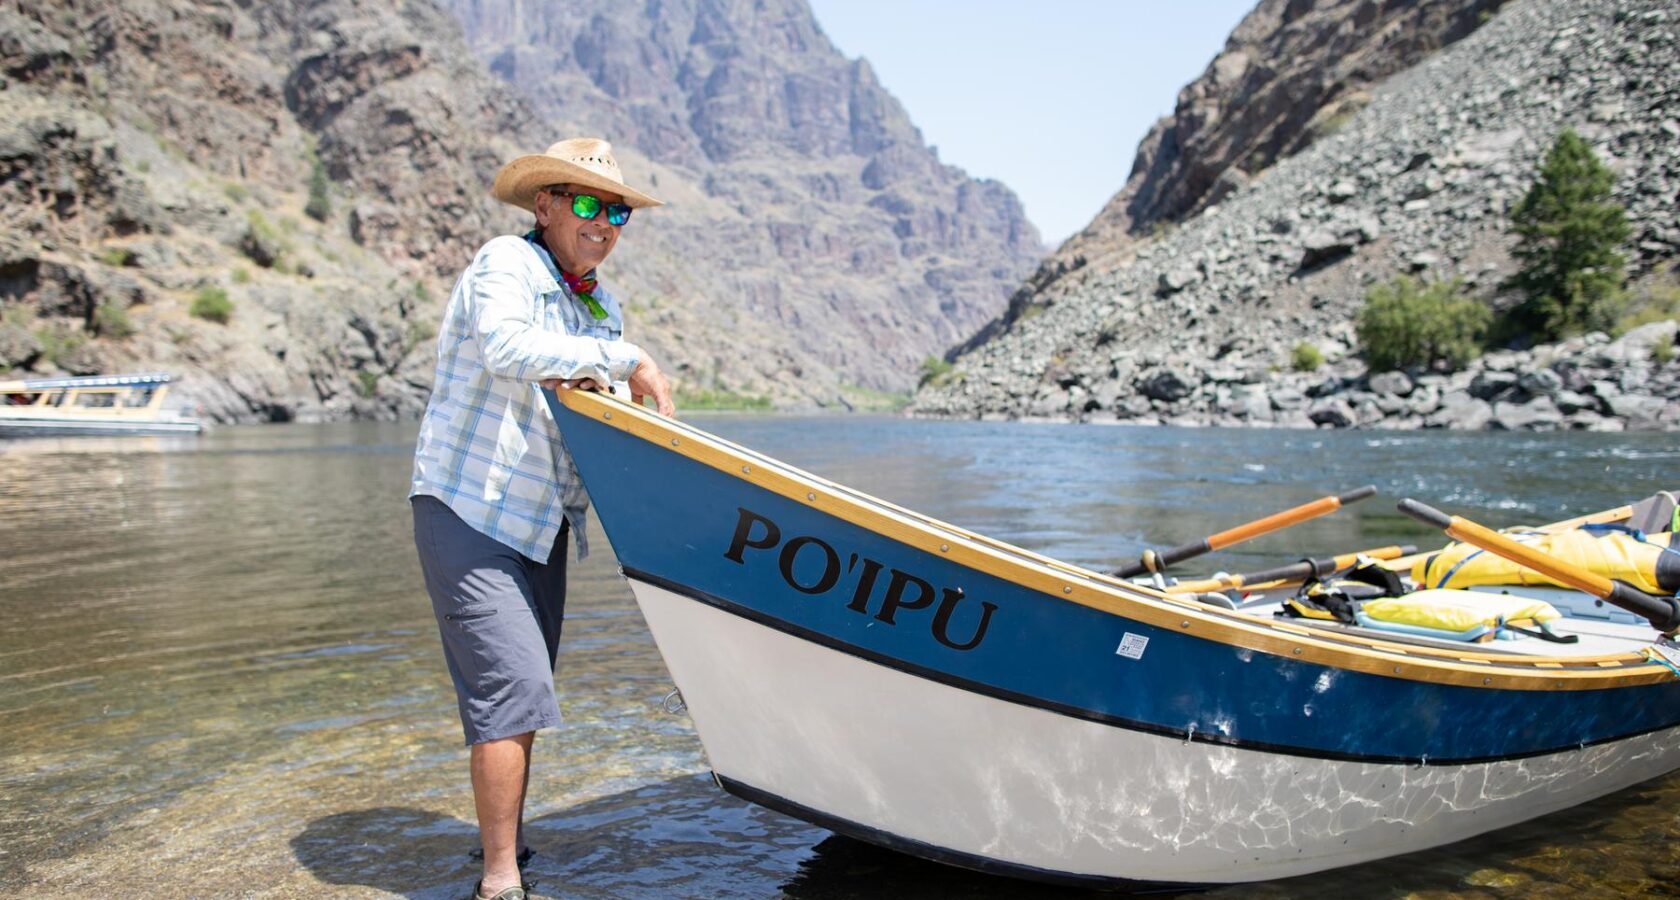 Legendary Idaho river guide Curt Chang stands knee-deep in the Snake River next to his blue and white dory, Poi’pu.